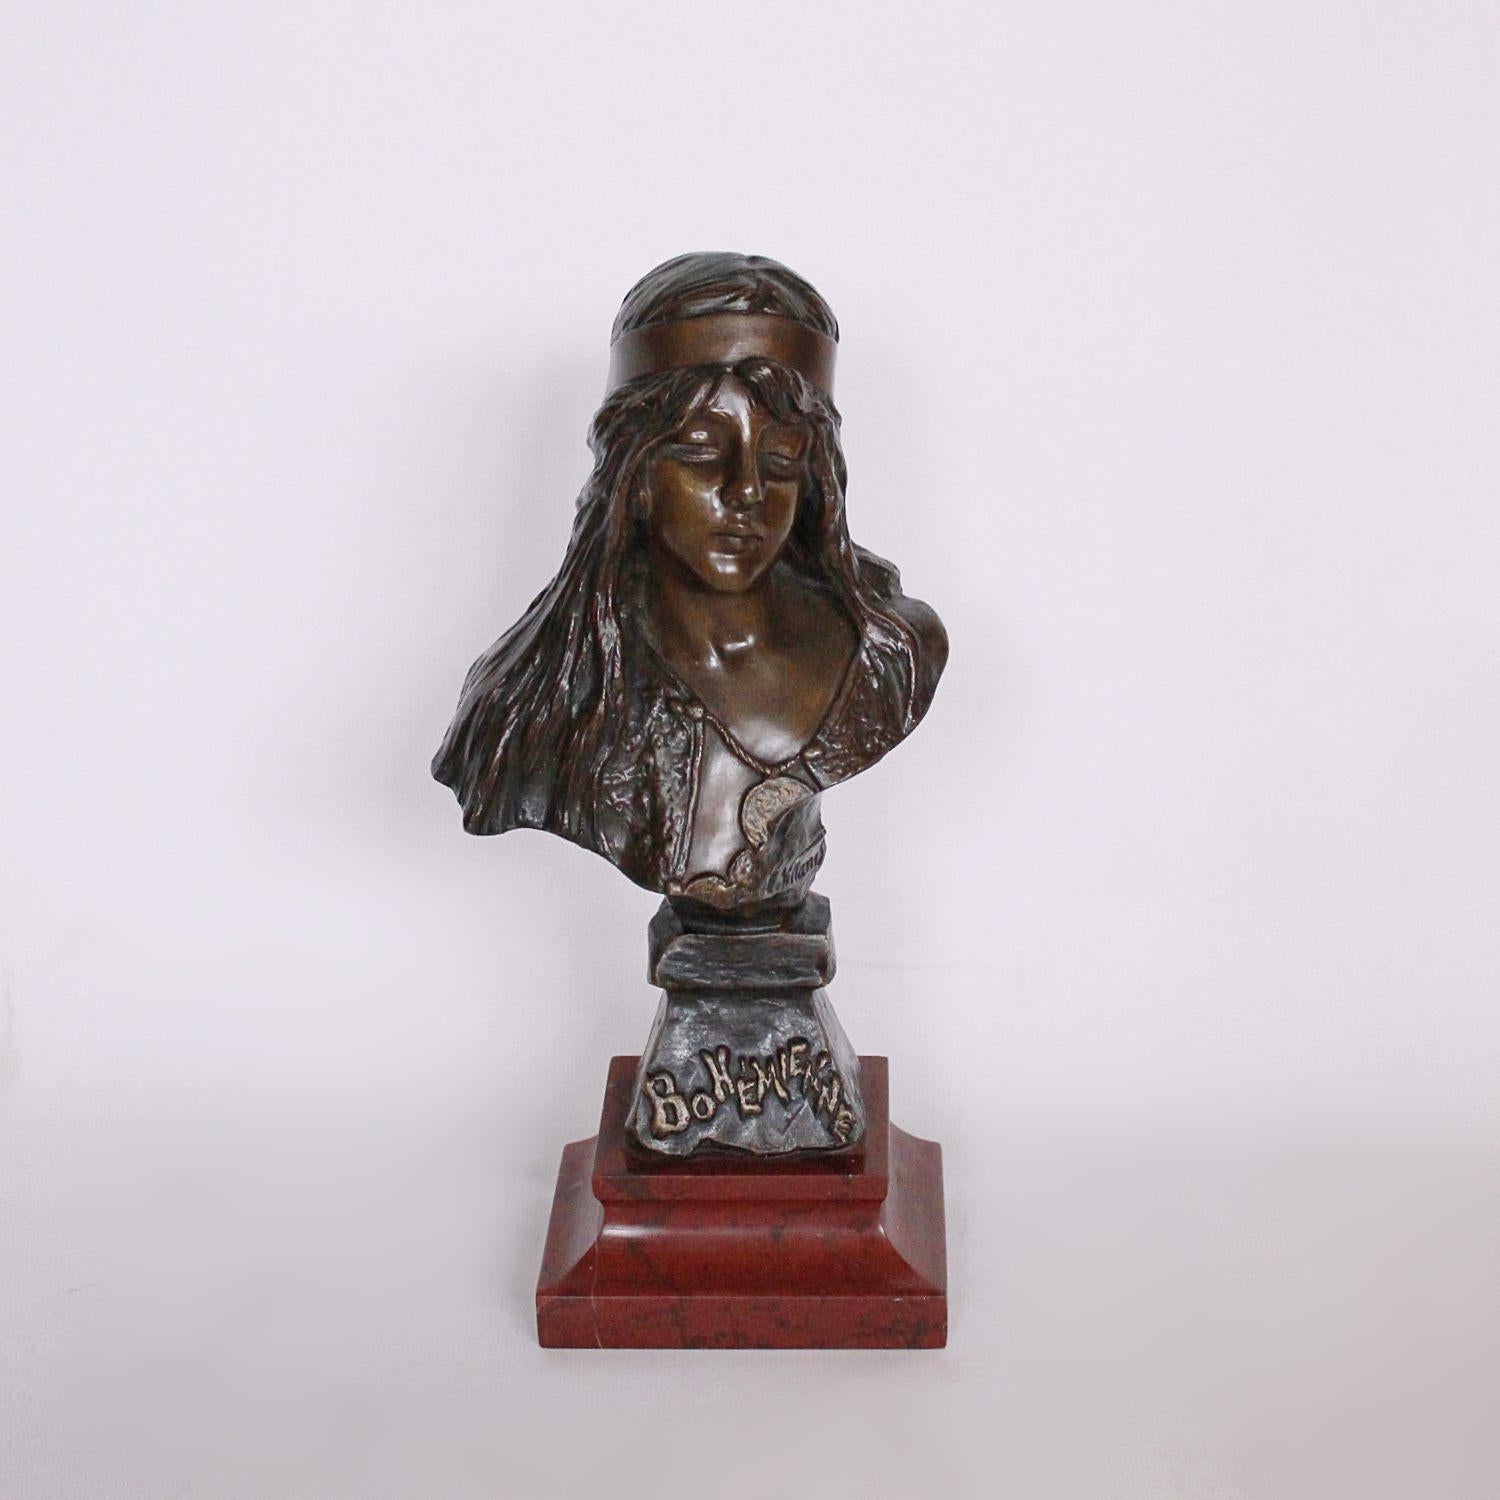 An Art Nouveau bronze bust by Emmanuel Villanis (1858-1914). Golden brown patination. Set on a marble base. 

Signed Villanis to side, with Society des Bronzes foundry stamp and raised title to front.

